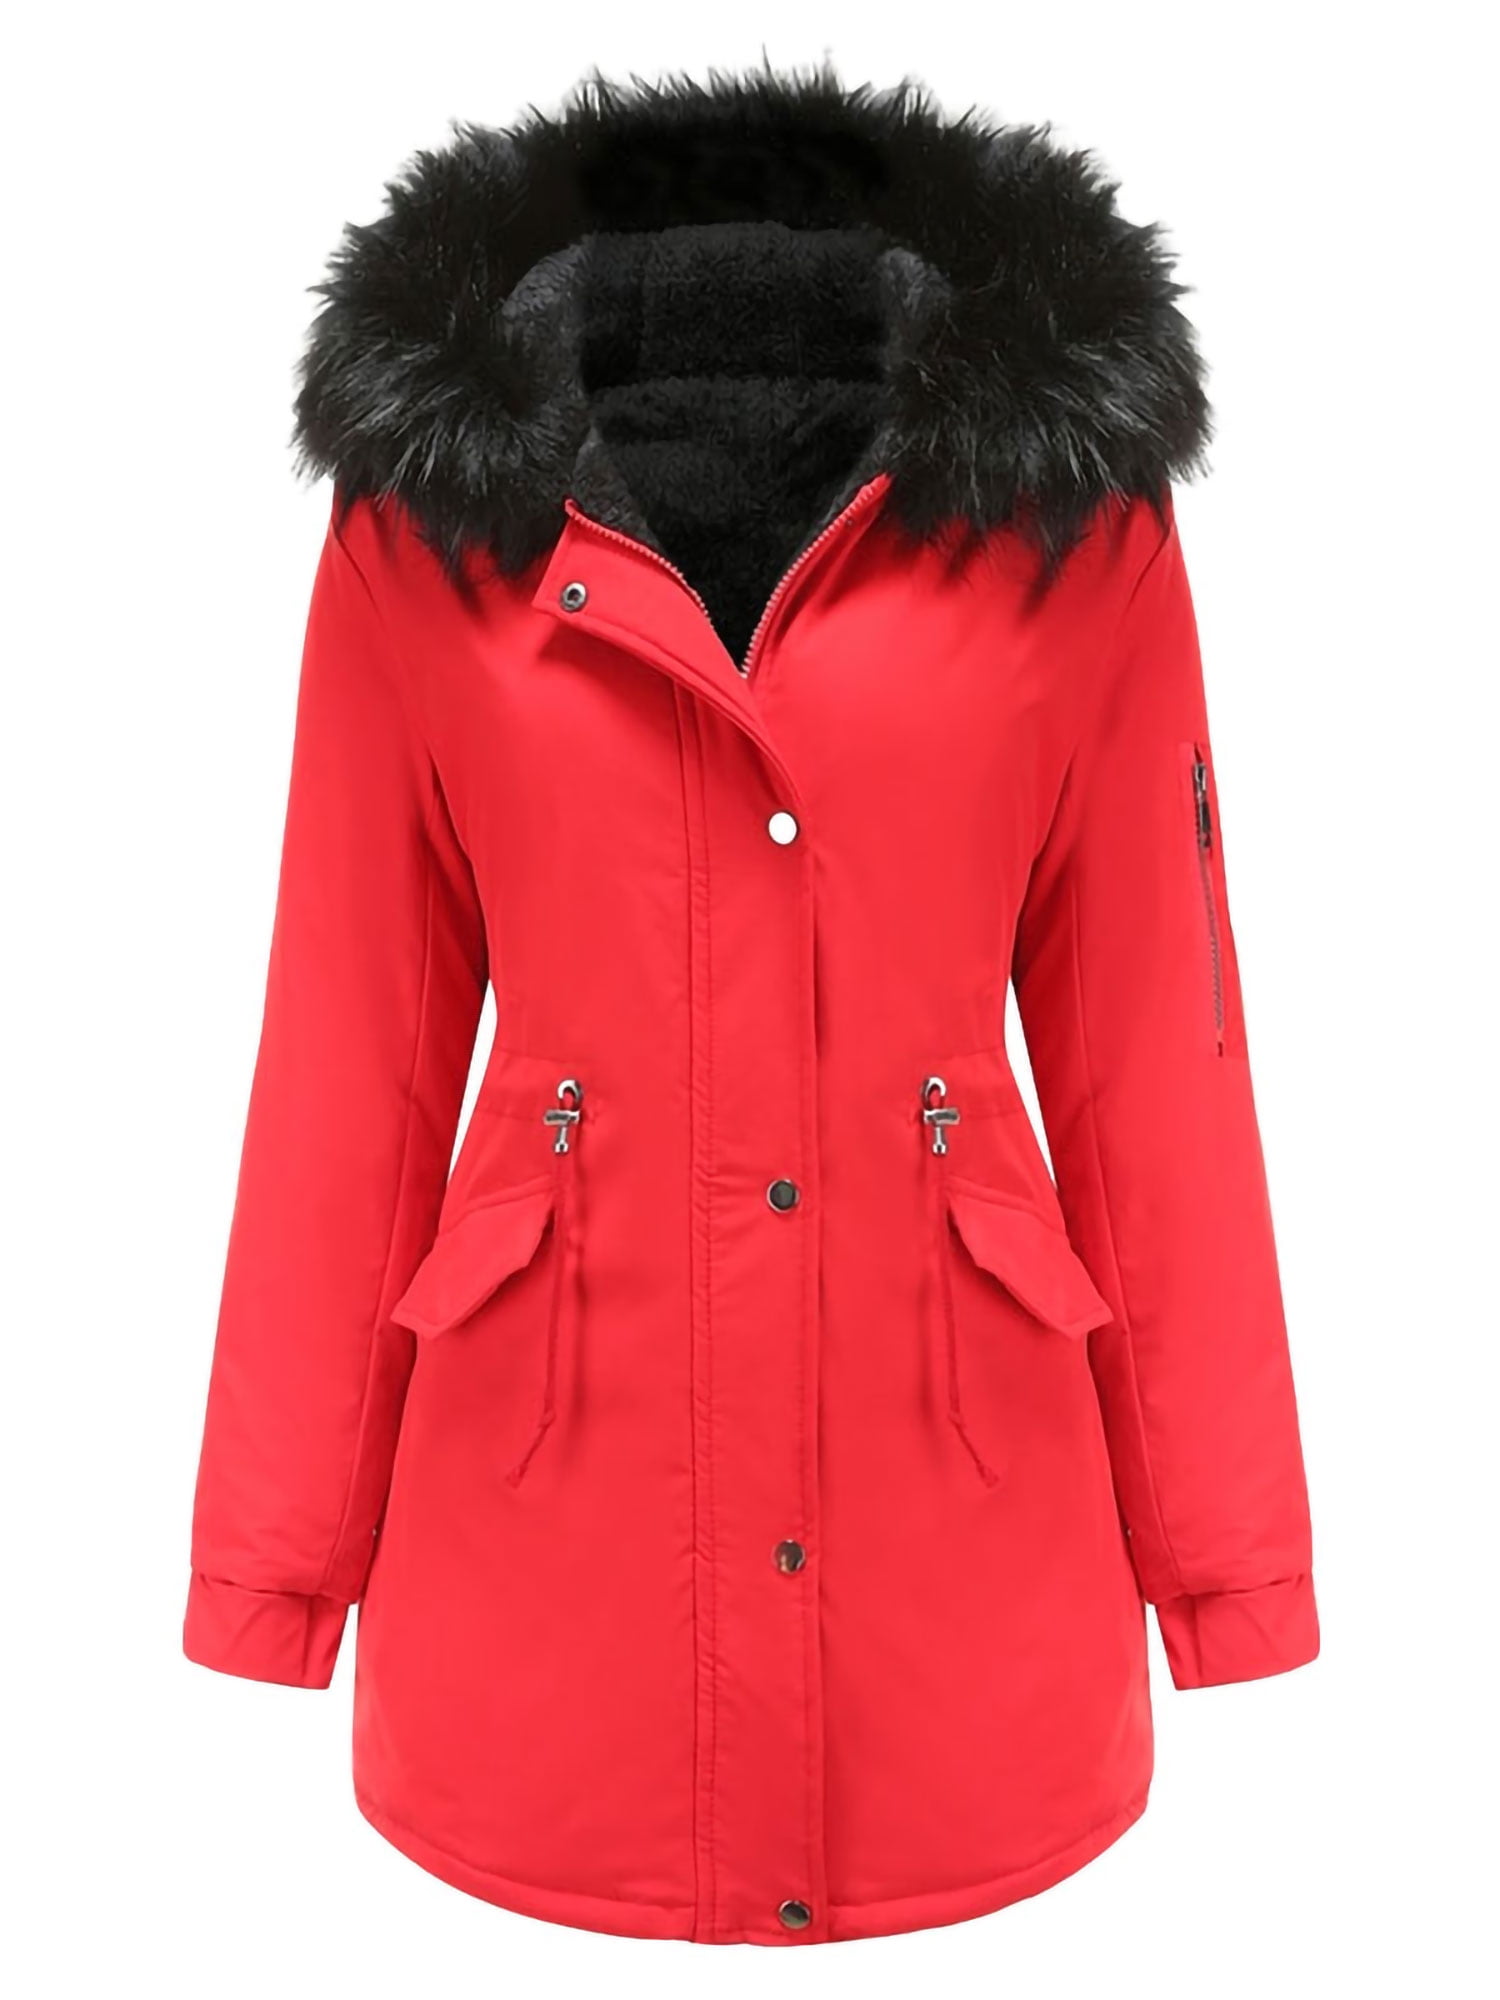 Mid-length Jacket with Hooded for Elegant Lady Fur or Faux Fur Zip Pockets Drawstring belt Softshell Outerwear Trench Winter Overcoat Windproof Parka Coat for Women